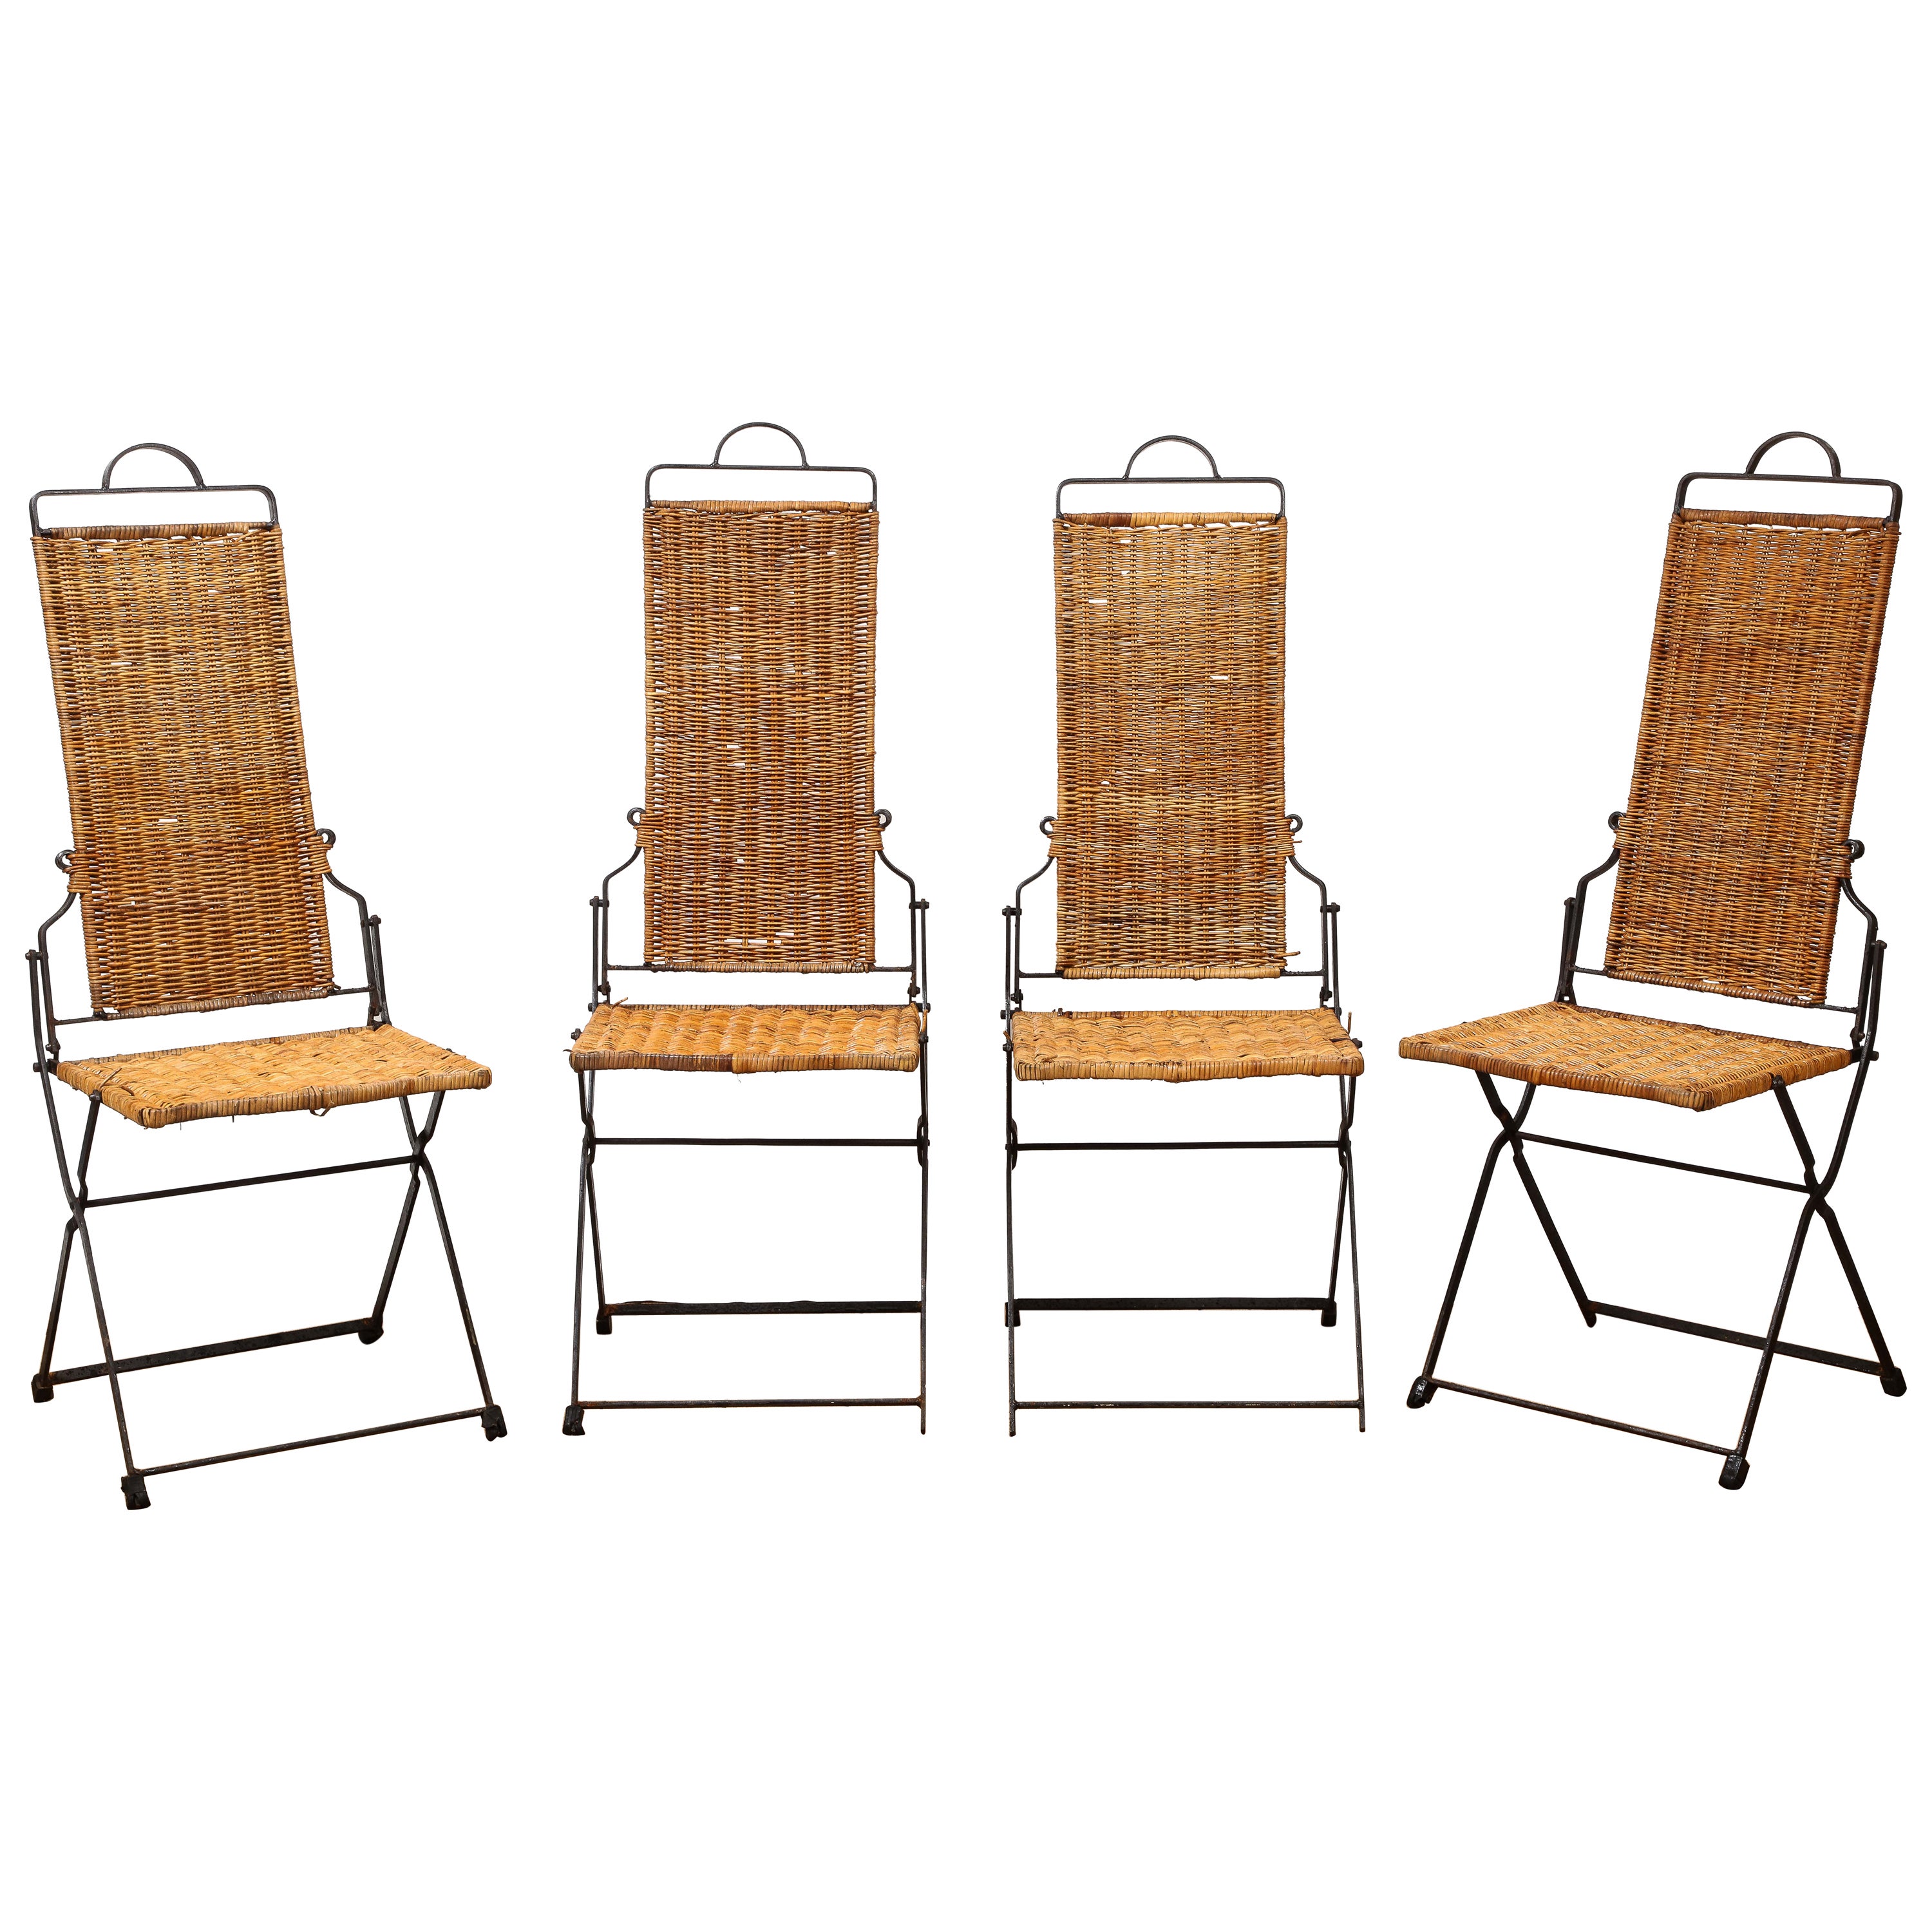 Set of Four French Provincial Style Wicker and Iron Folding Chairs 